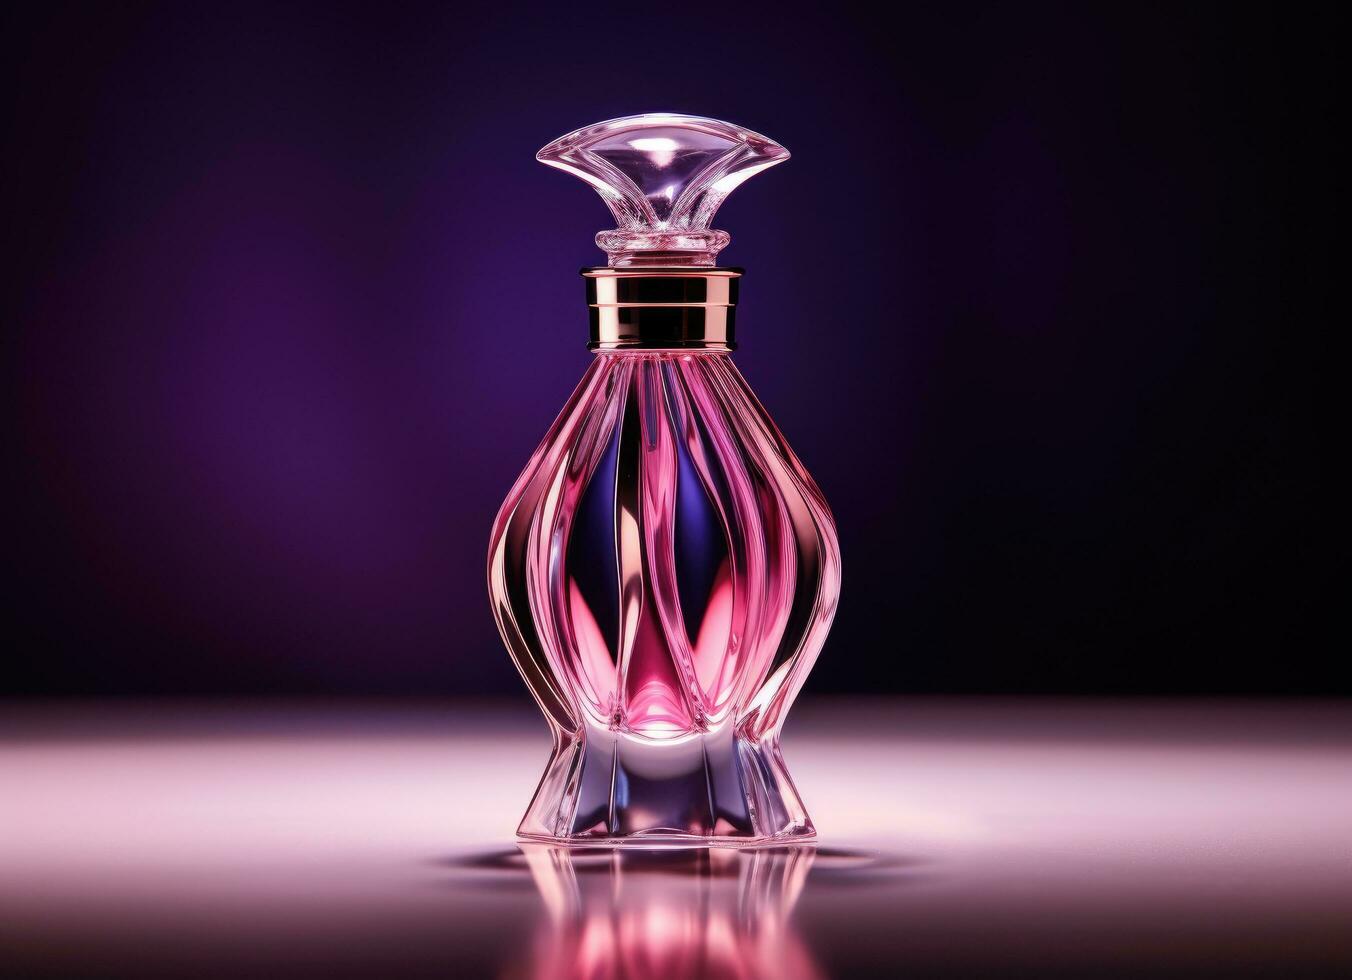 AI generated a dark image of a perfume bottle with purple glowing light photo